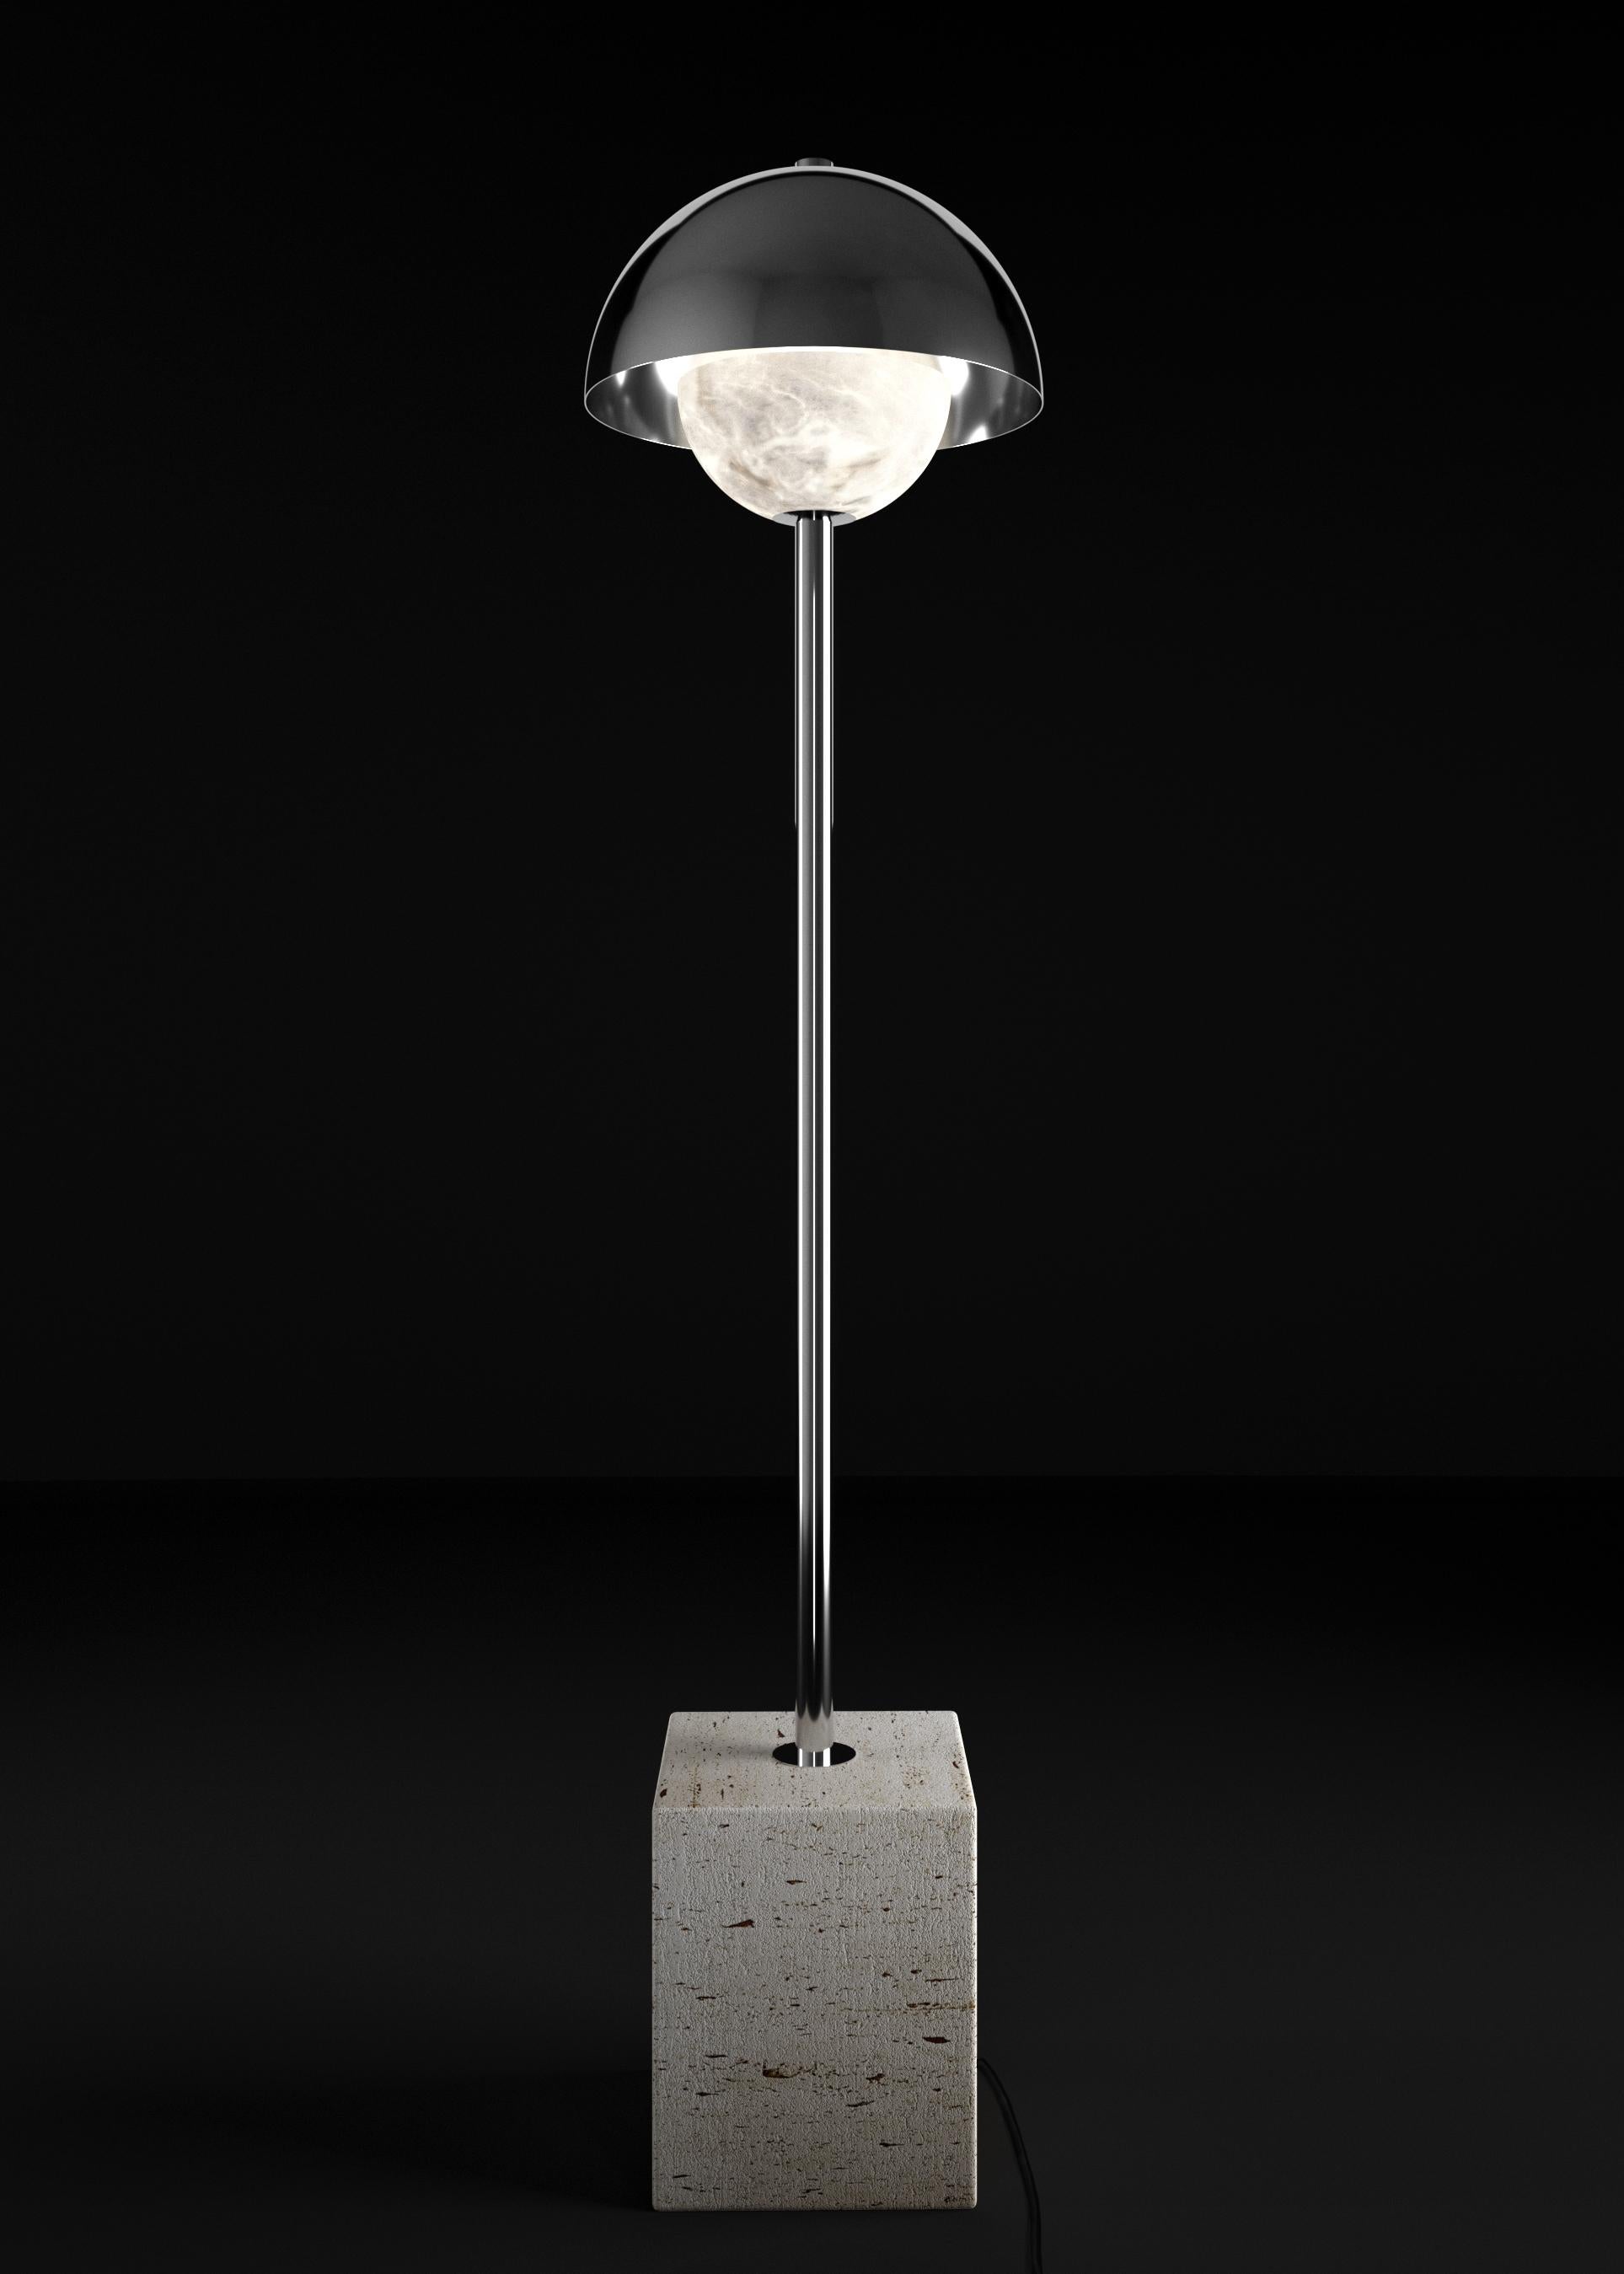 Apollo Shiny Silver Metal Floor Lamp by Alabastro Italiano
Dimensions: D 30 x W 30 x H 130 cm.
Materials: White alabaster, marble, black silk cables and metal.

Available in different finishes: Shiny Silver, Bronze, Brushed Brass, Ruggine of